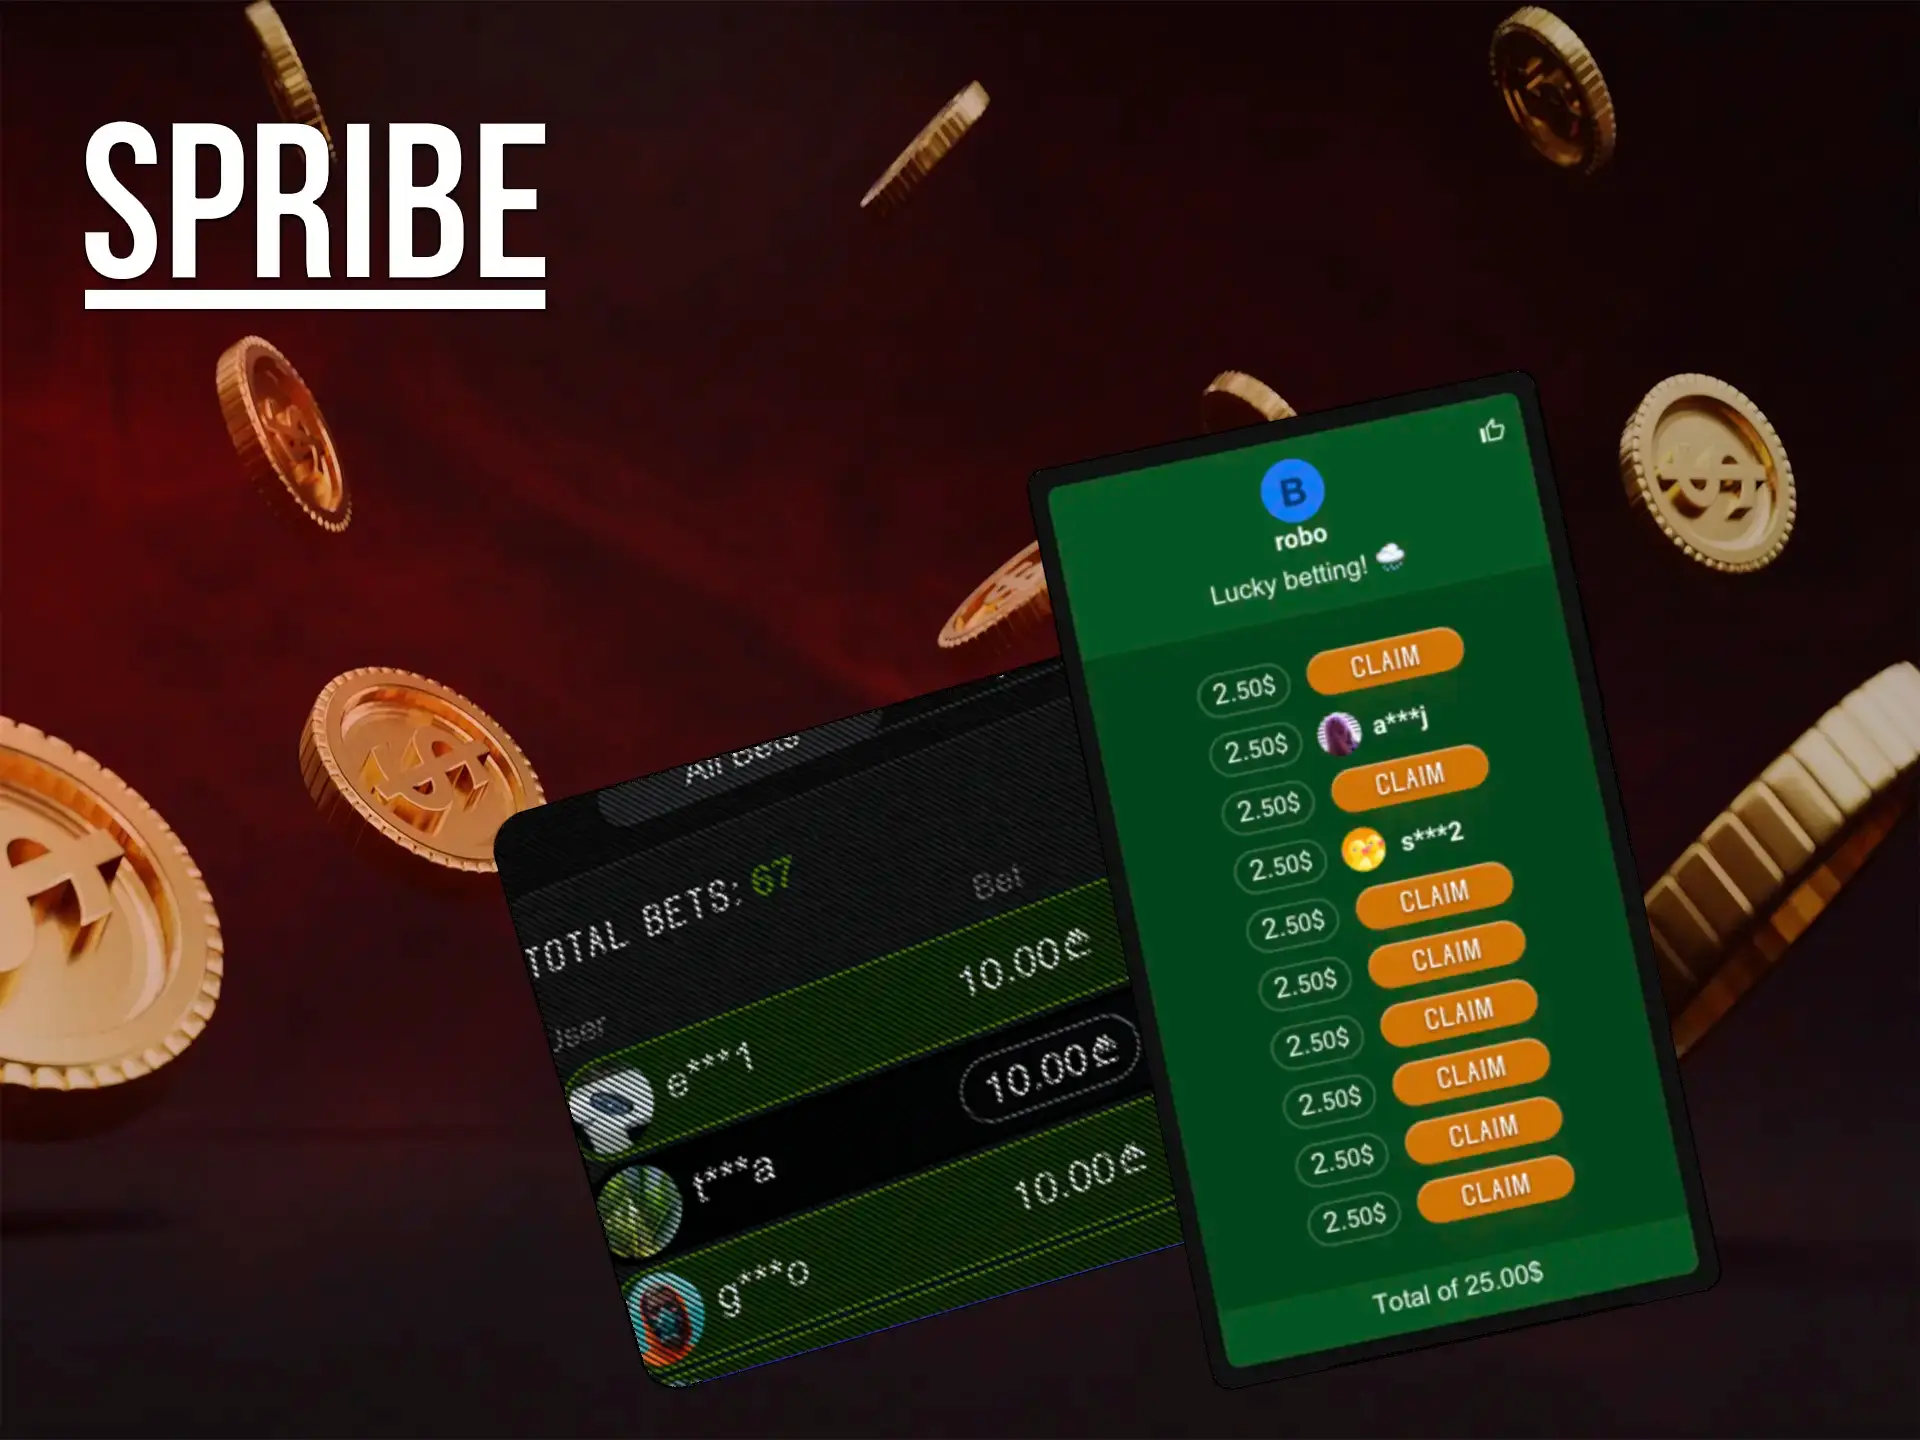 Get your bonus right now with Spribe.